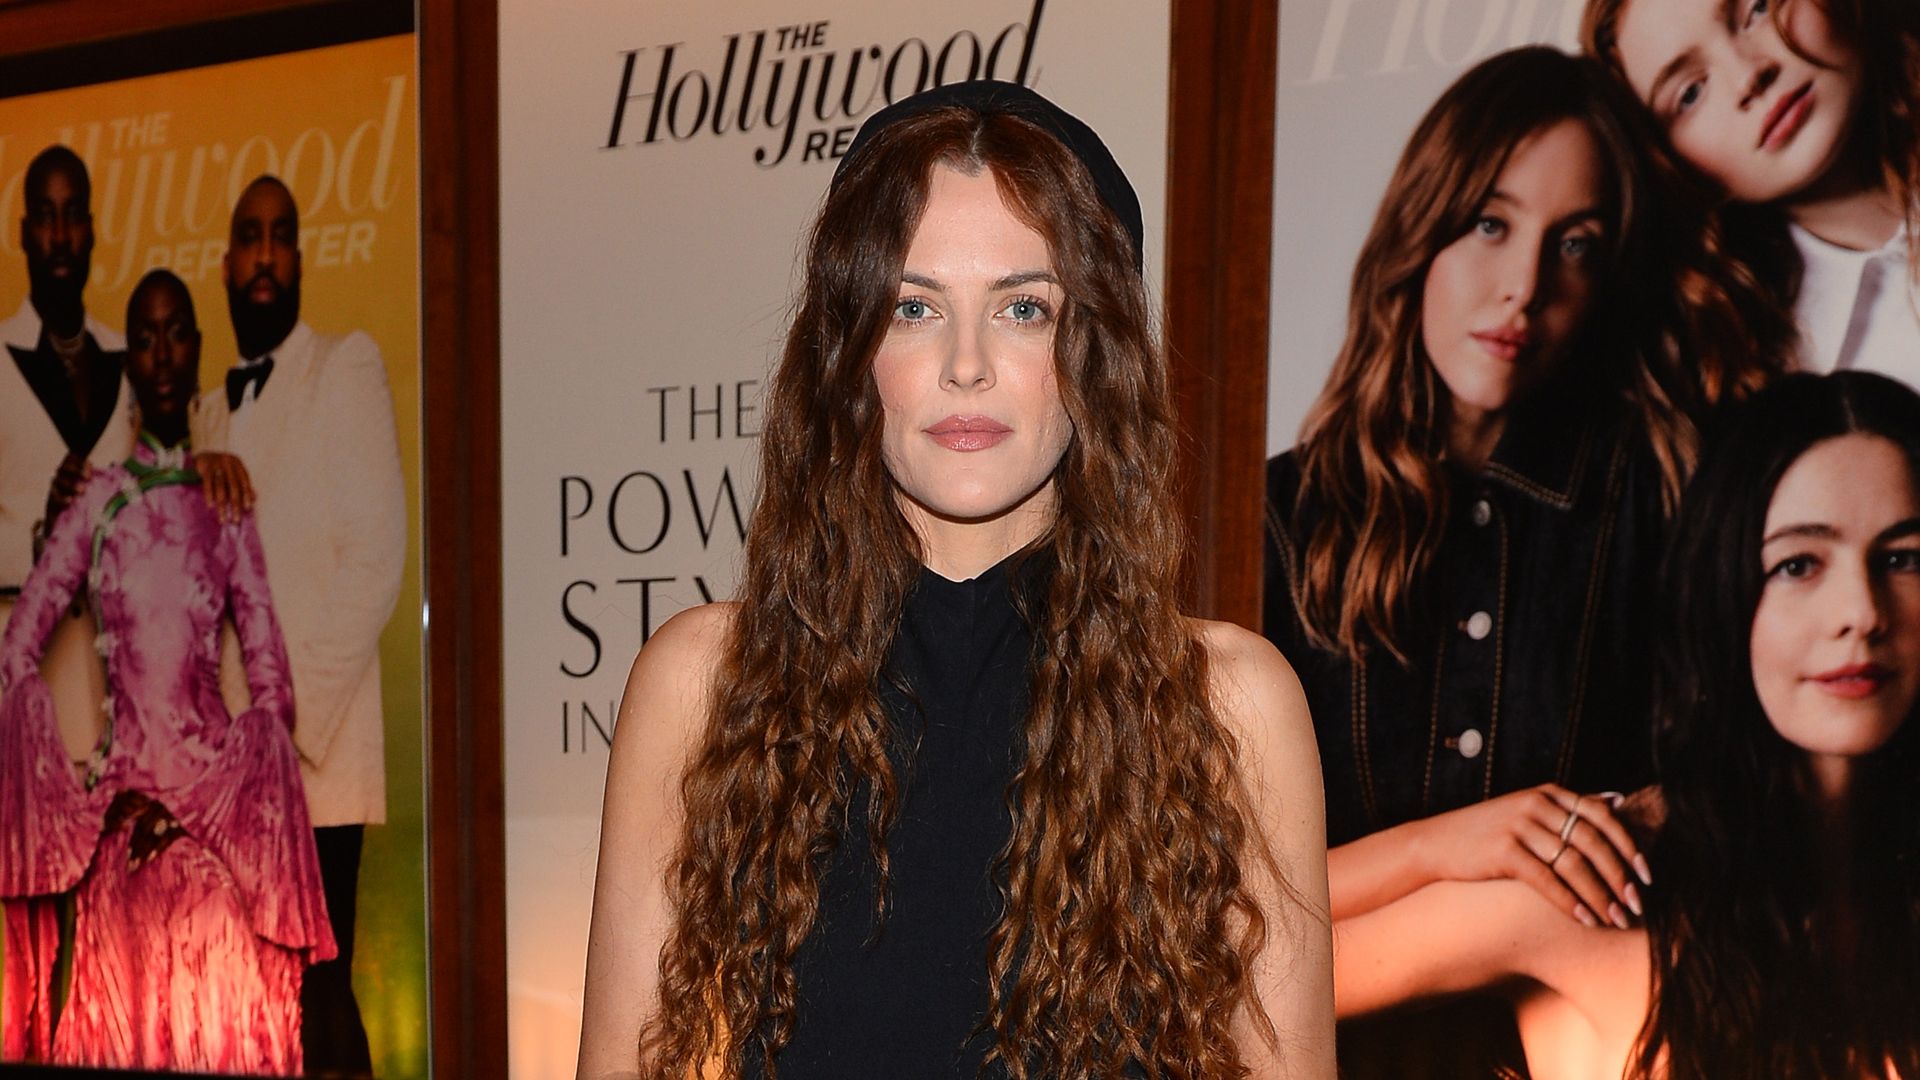 Riley Keough attends The Hollywood Reporter And Jimmy Choo Power Stylists Dinner at The Terrace at Sunset Tower on March 28, 2023 in West Hollywood, California